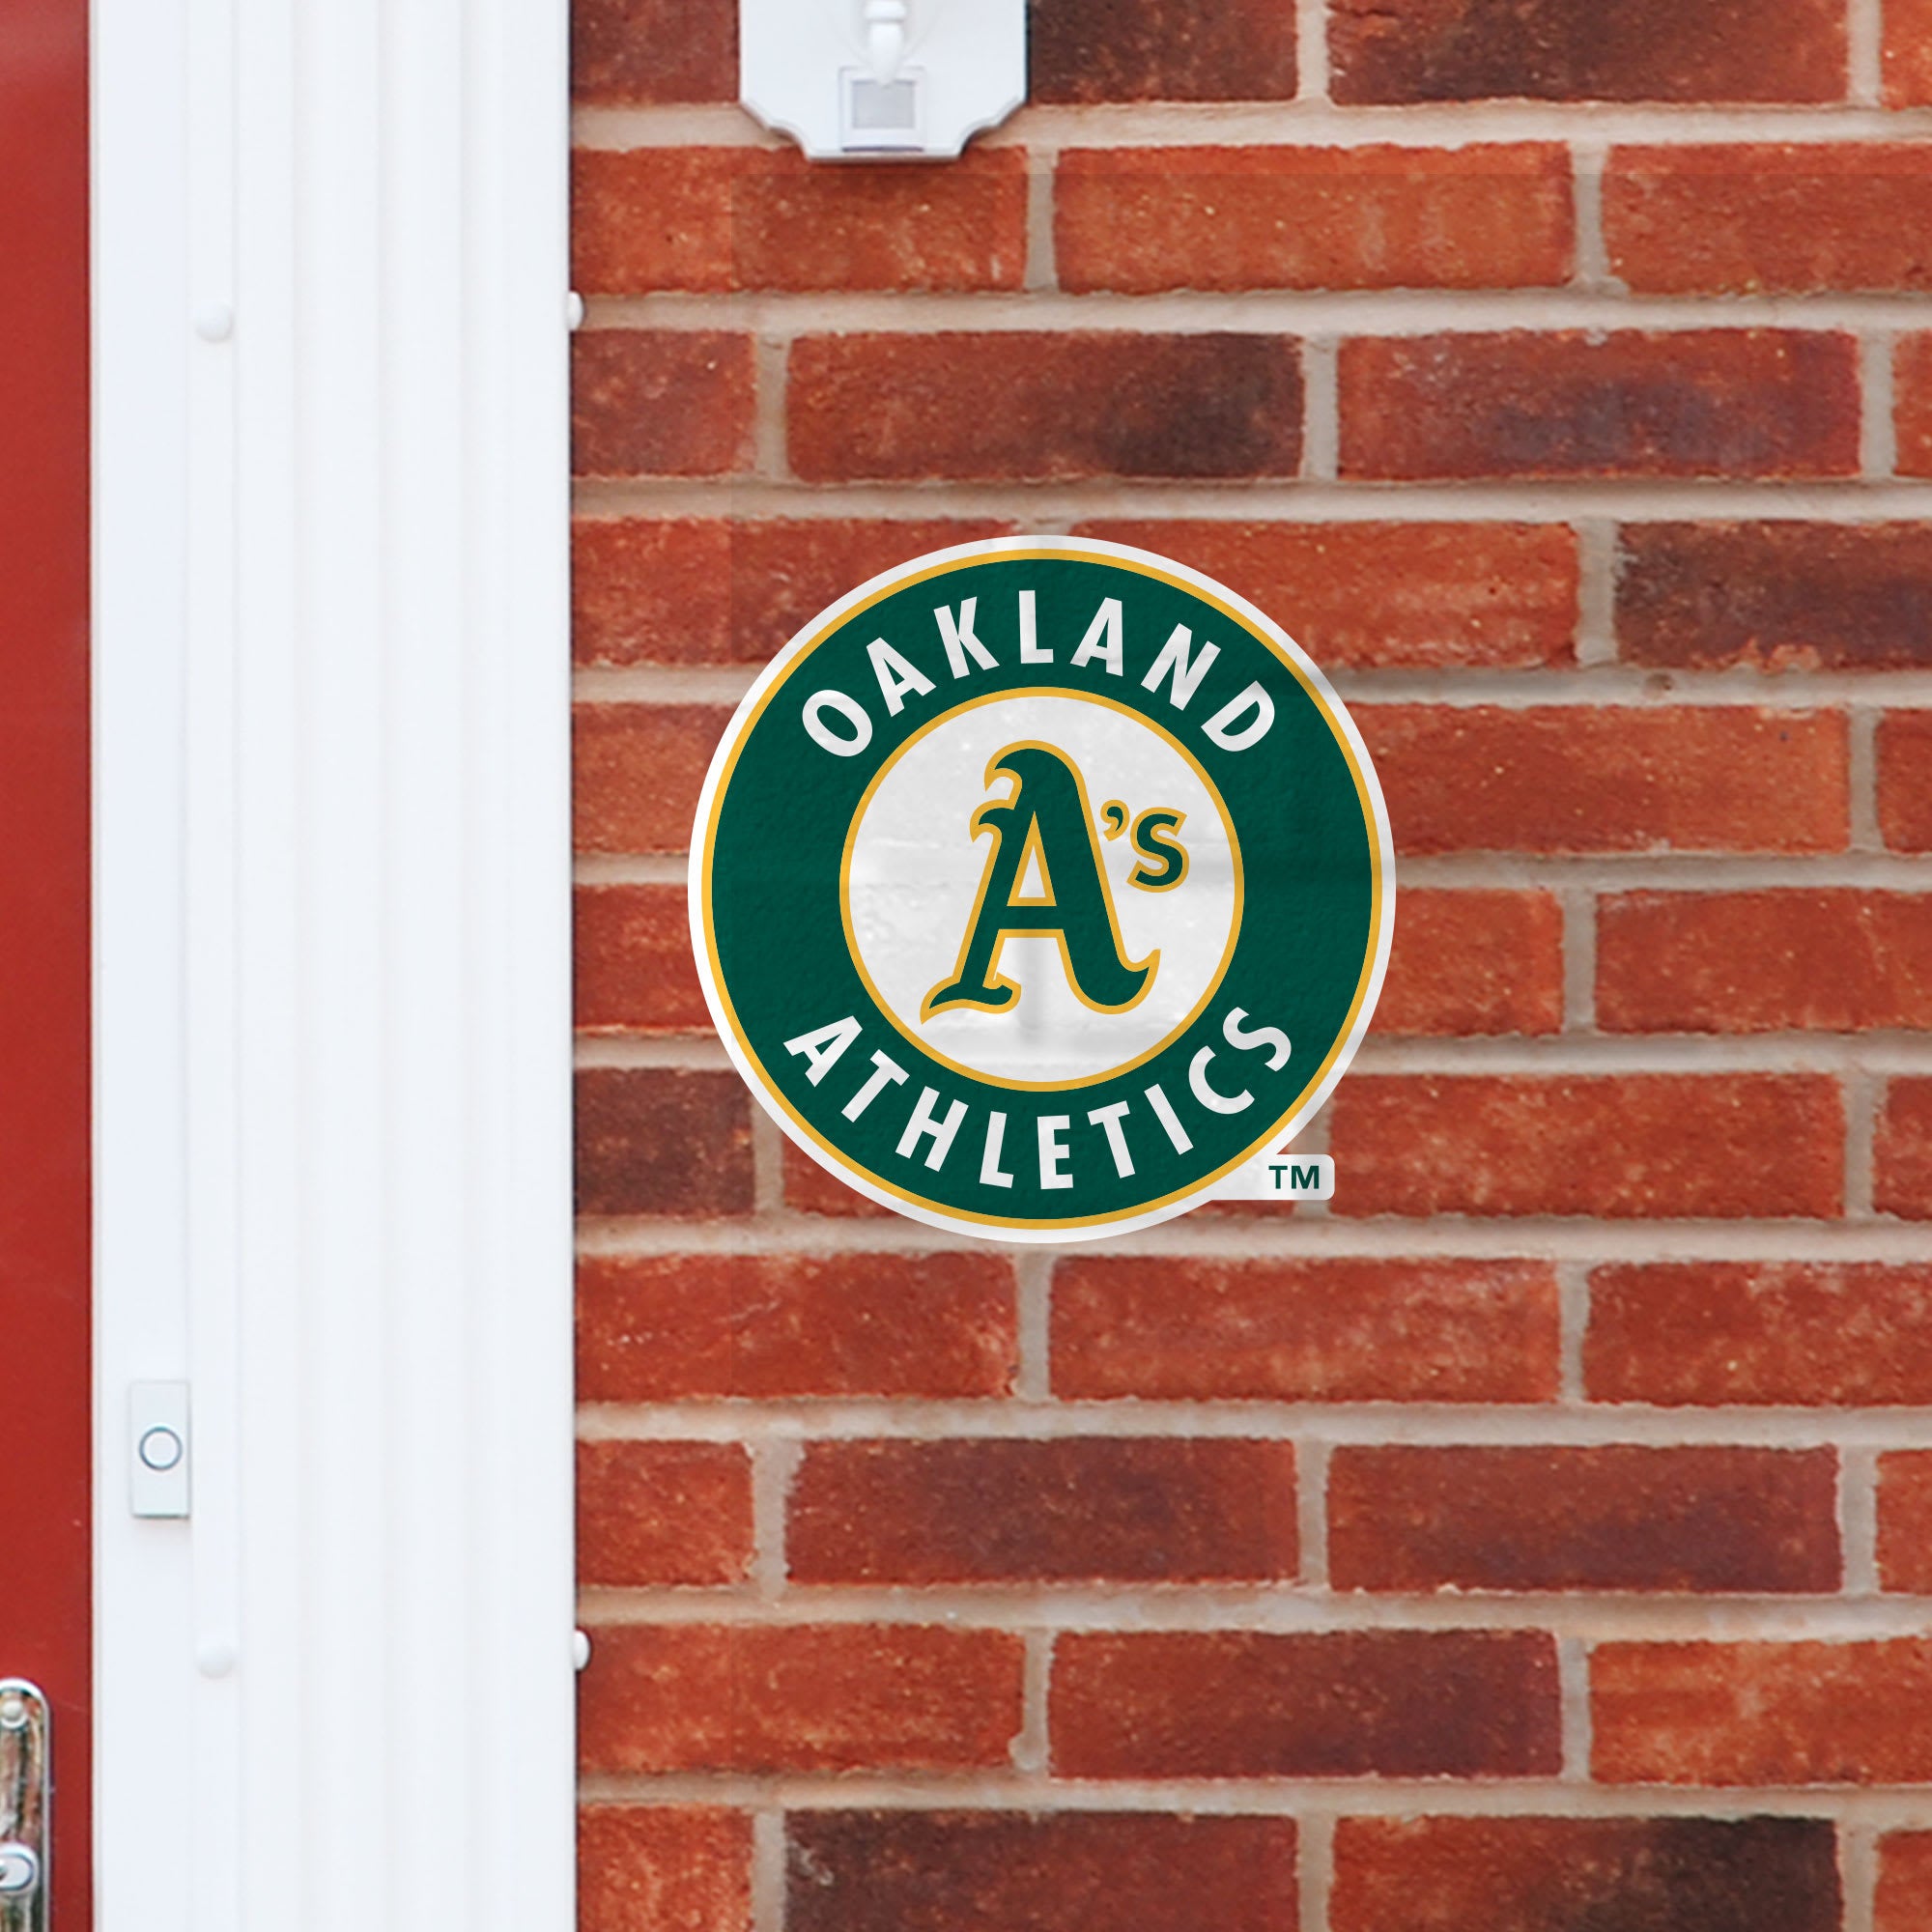 Oakland Athletics: Logo - Officially Licensed MLB Outdoor Graphic Large by Fathead | Wood/Aluminum